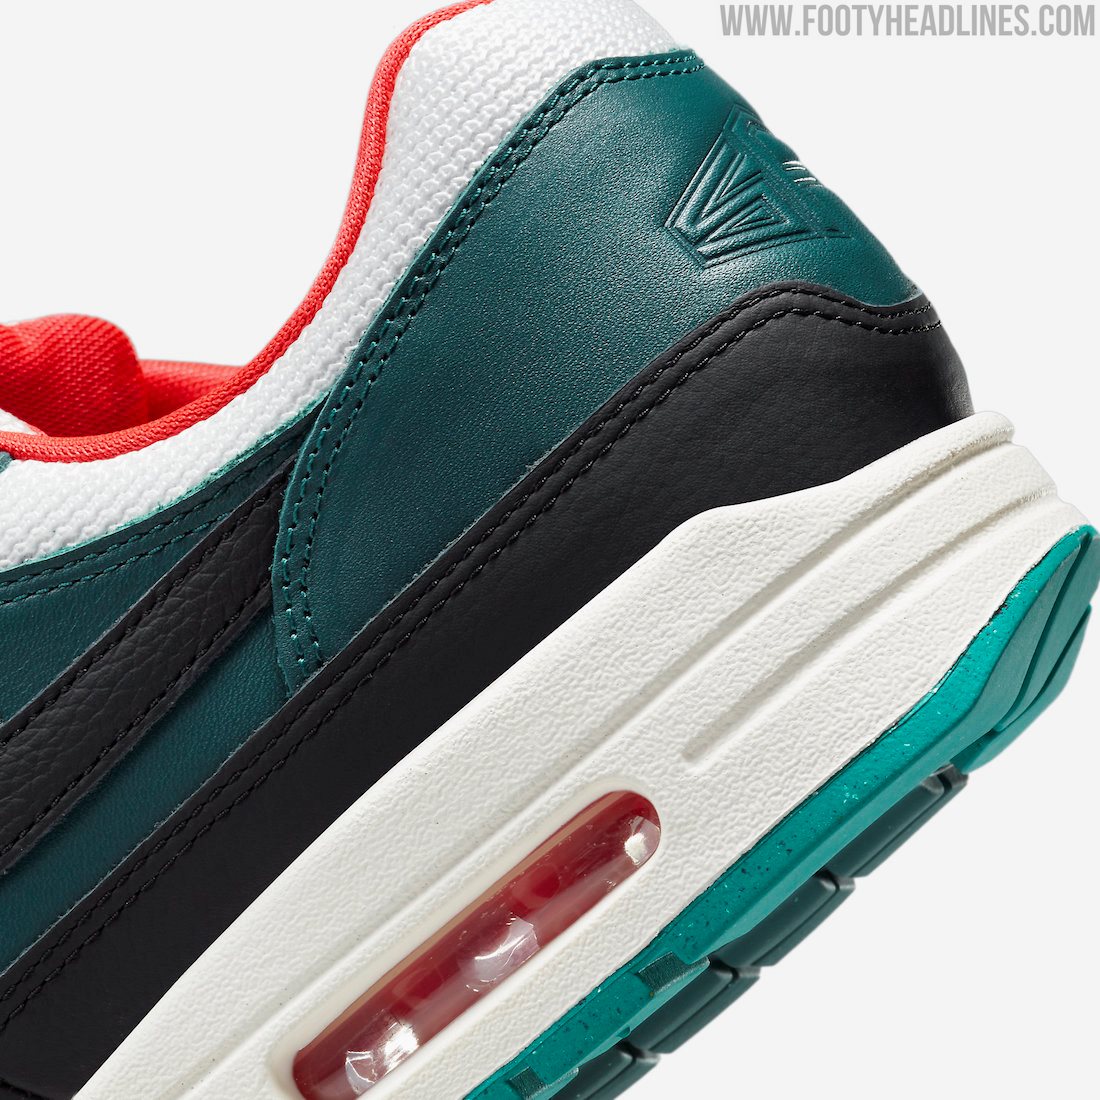 pagar Perder Velocidad supersónica Better Colors Than The Leaked Kit? Liverpool x LeBron James Nike Air Max 1  Leaked - Footy Headlines